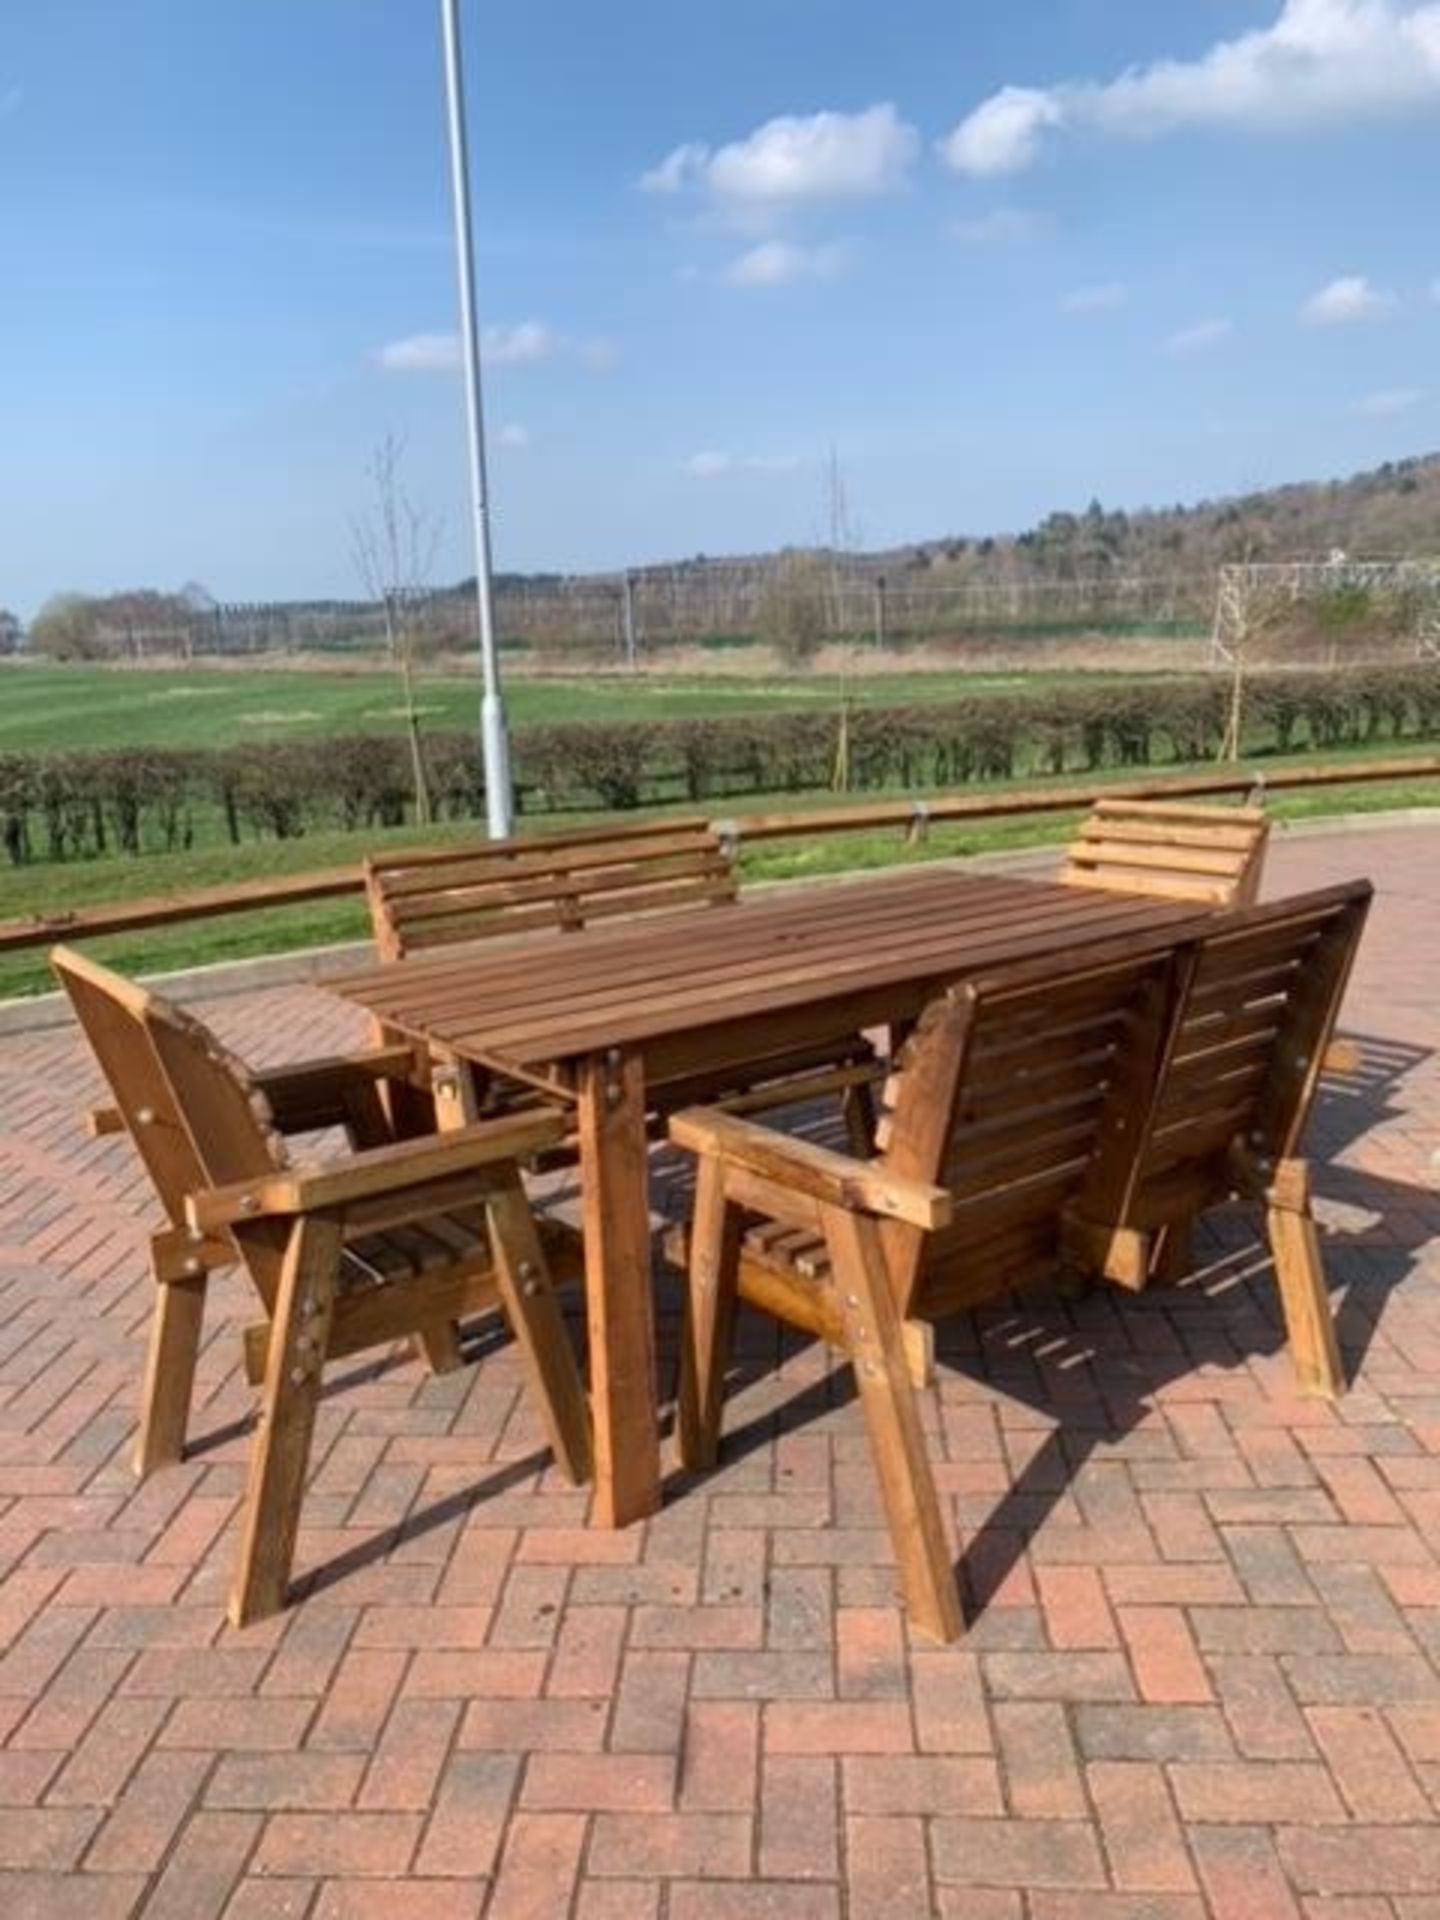 BRAND NEW QUALITY 6 seater handcrafted Garden Furniture set, Large table, 2 benches, 2 chairs